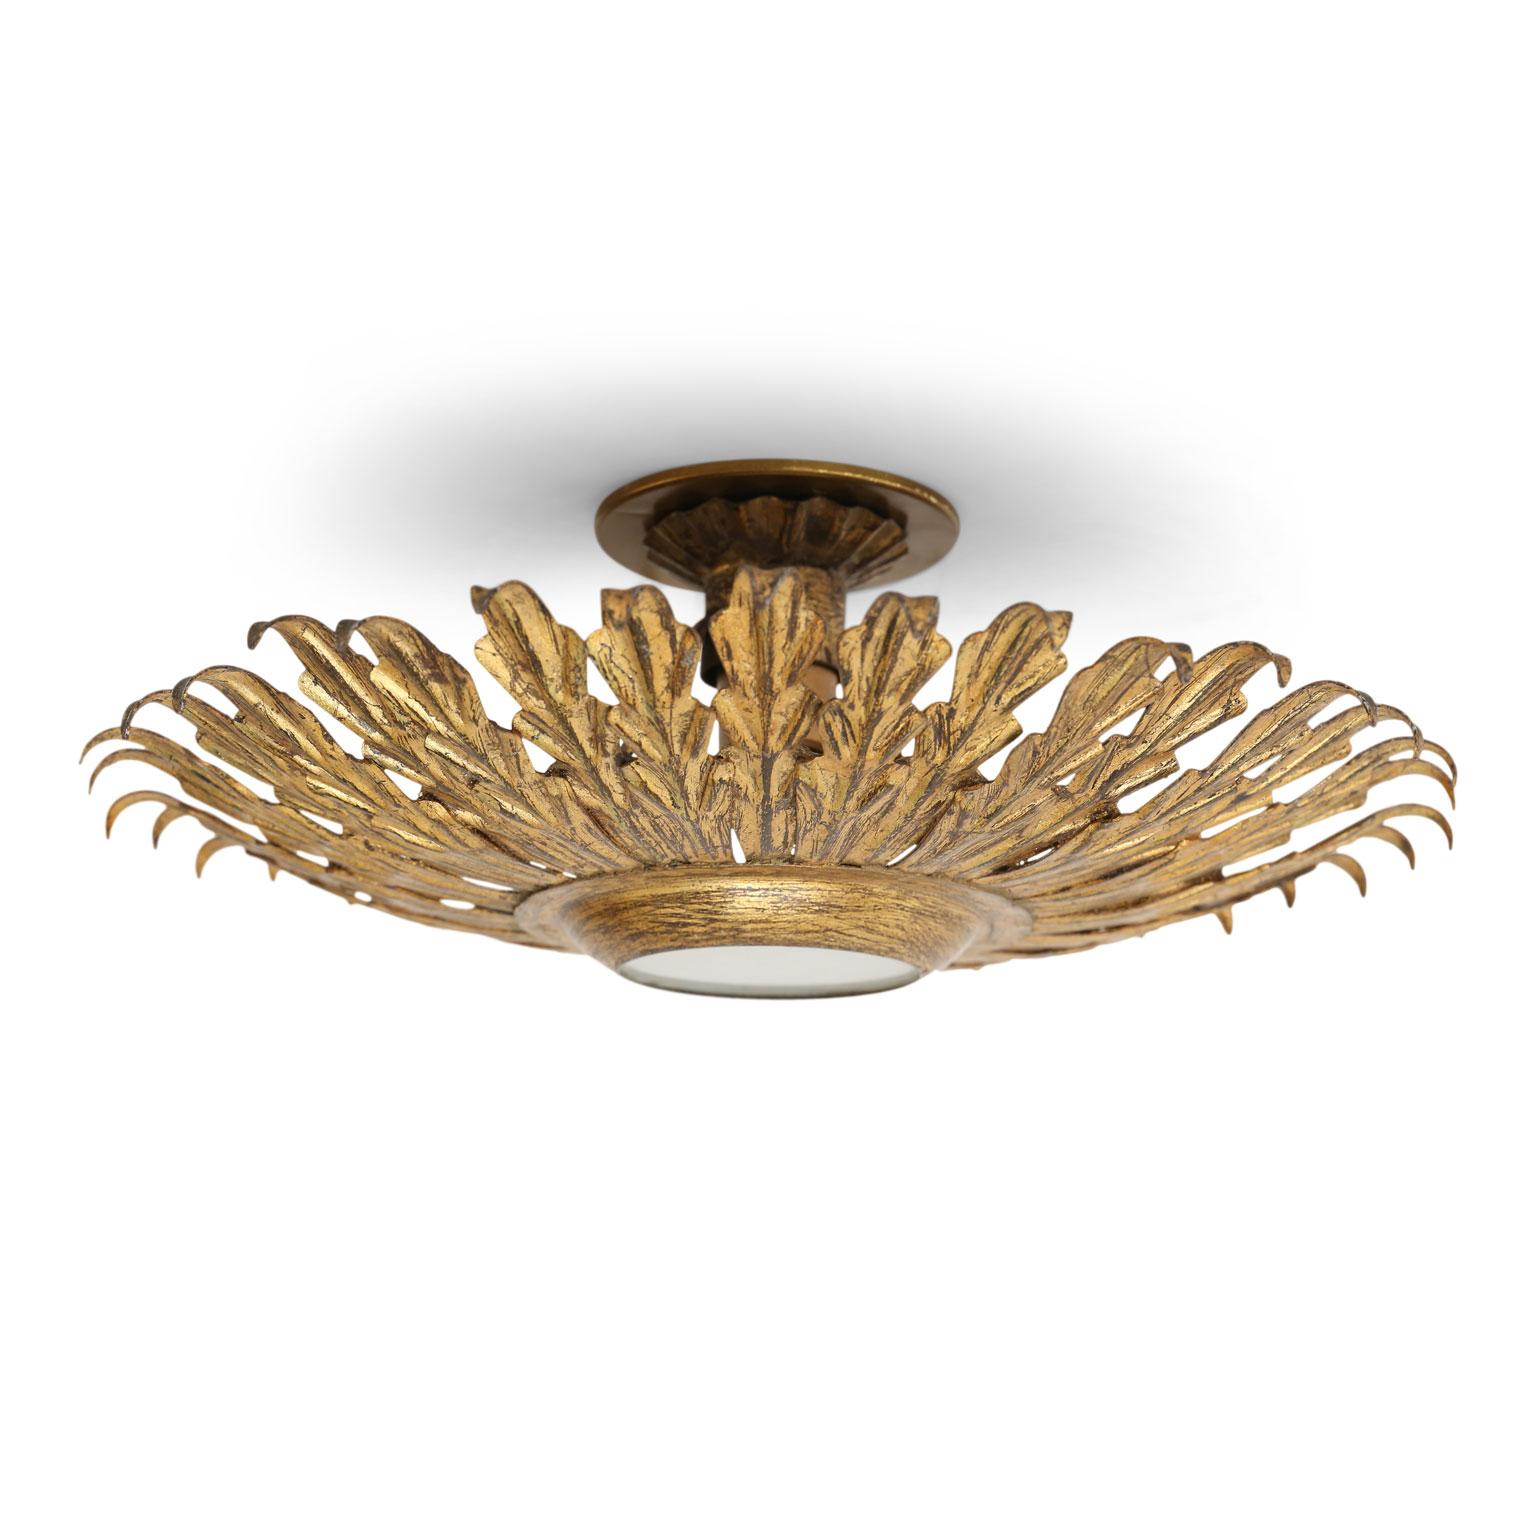 Gilt tole flush mount light for your ceiling or wall. Sunburst design of gilt tole leaves radiating from frosted glass shade. This vintage Spanish light dates from about 1950-1970 (Barcelona) and is newly wired for use within the USA. Accommodates a